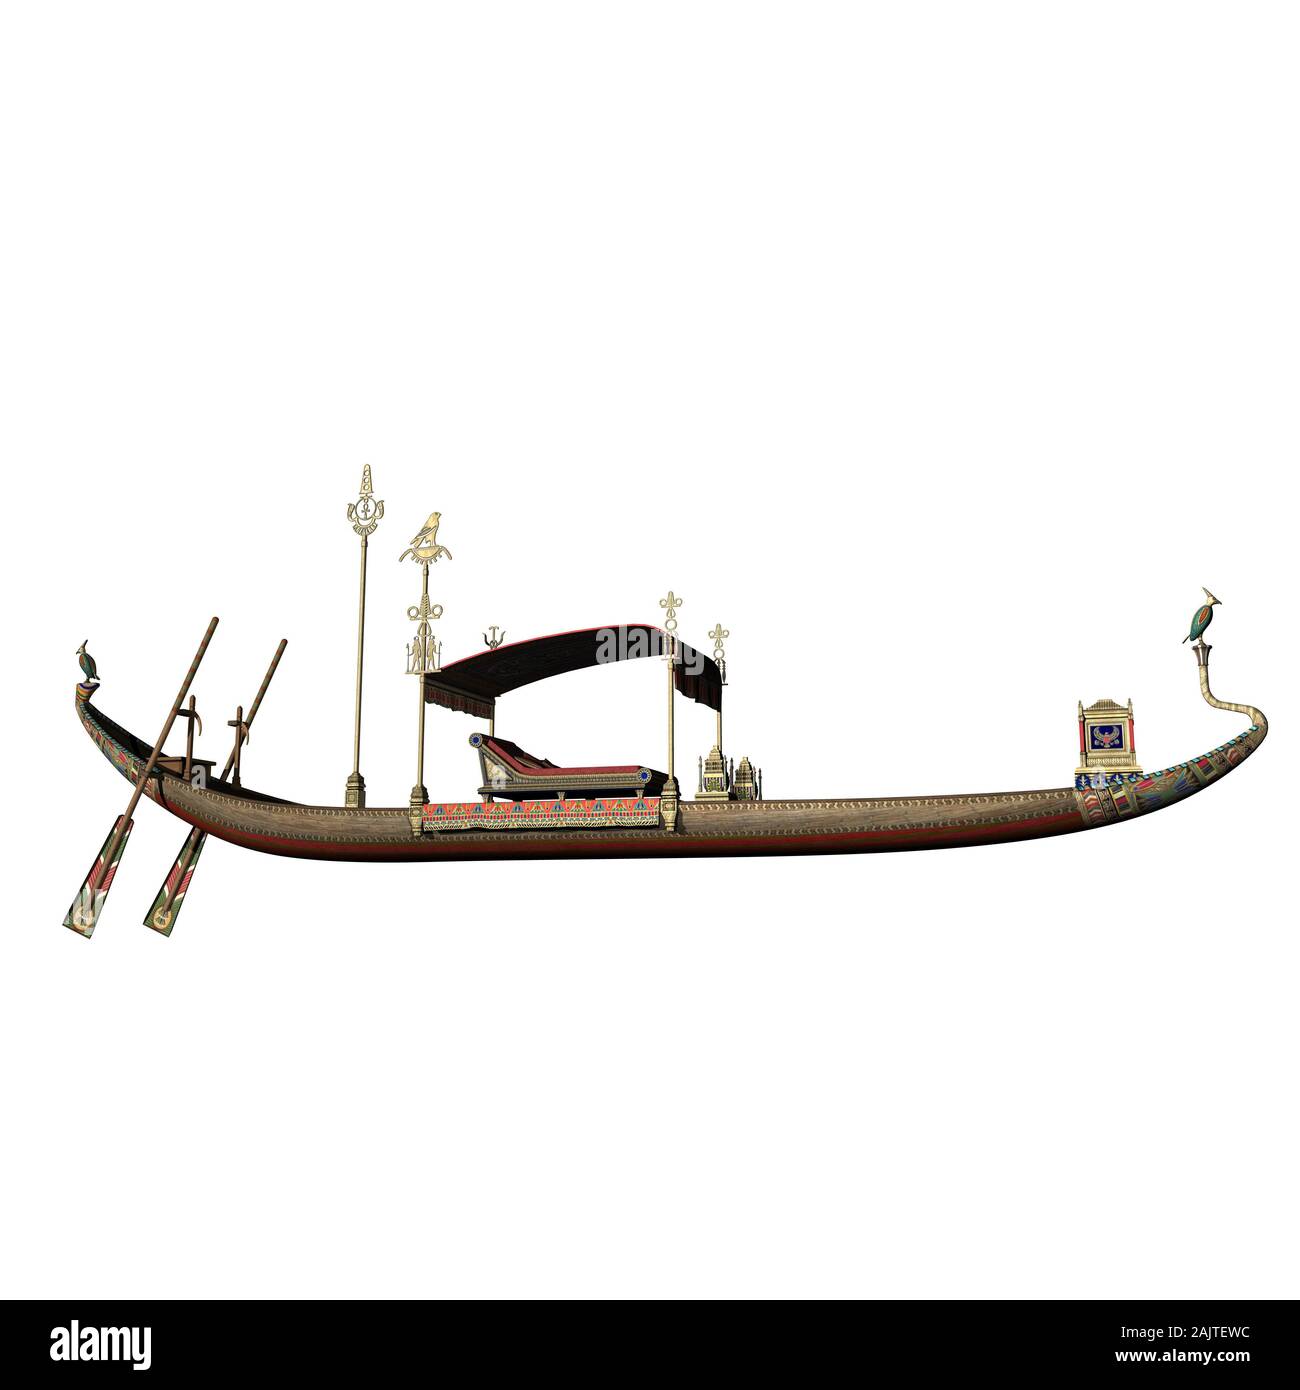 Illustration of An Ancient Egyptina ship or barge isolated over white Stock Photo